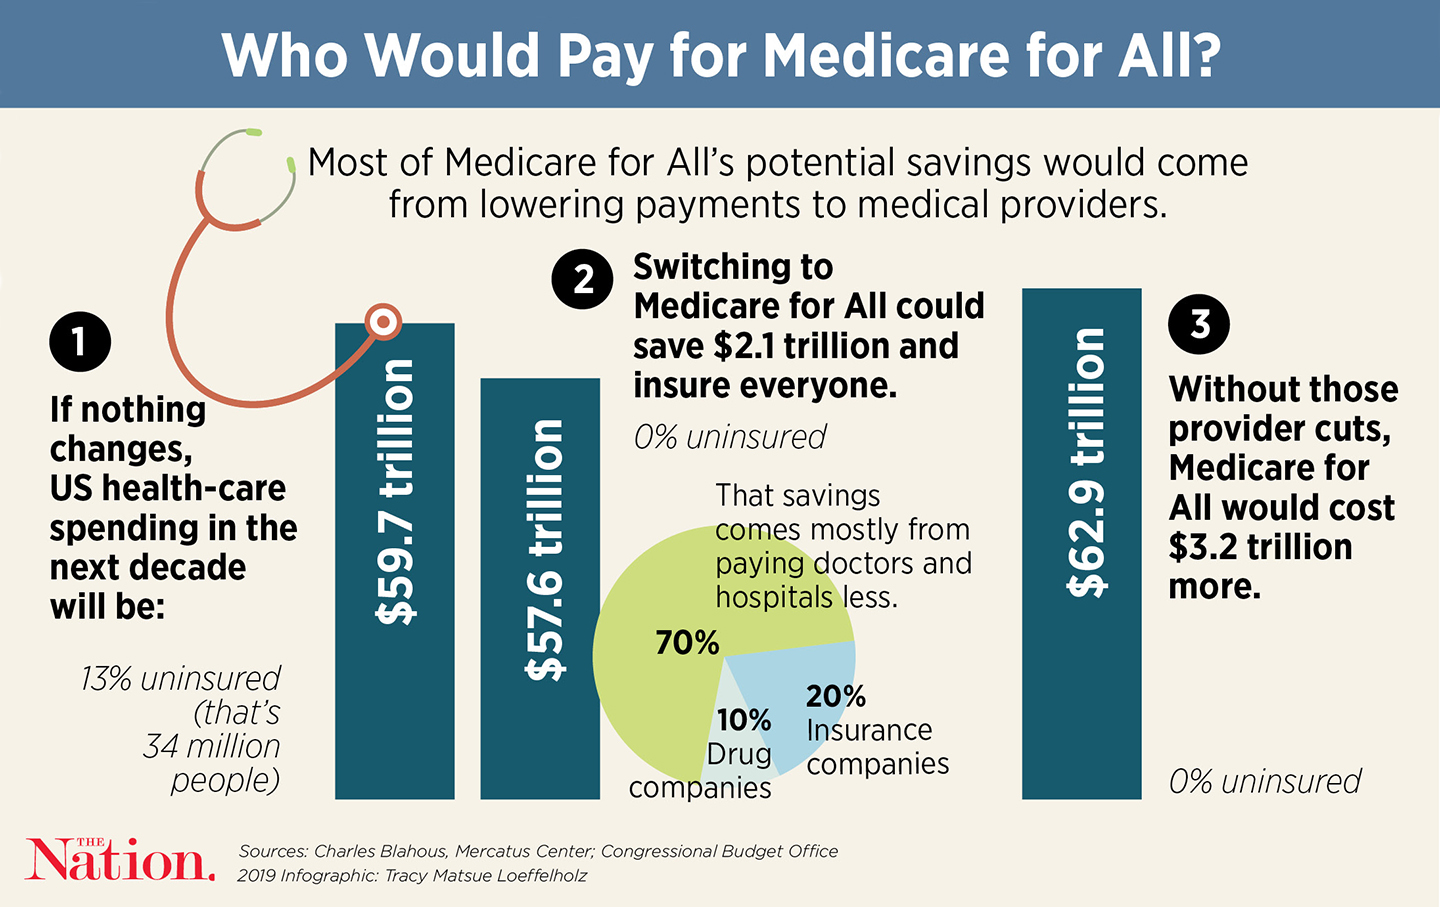 Want to Expand Medicare? Then Answer the $5 Trillion Questions.